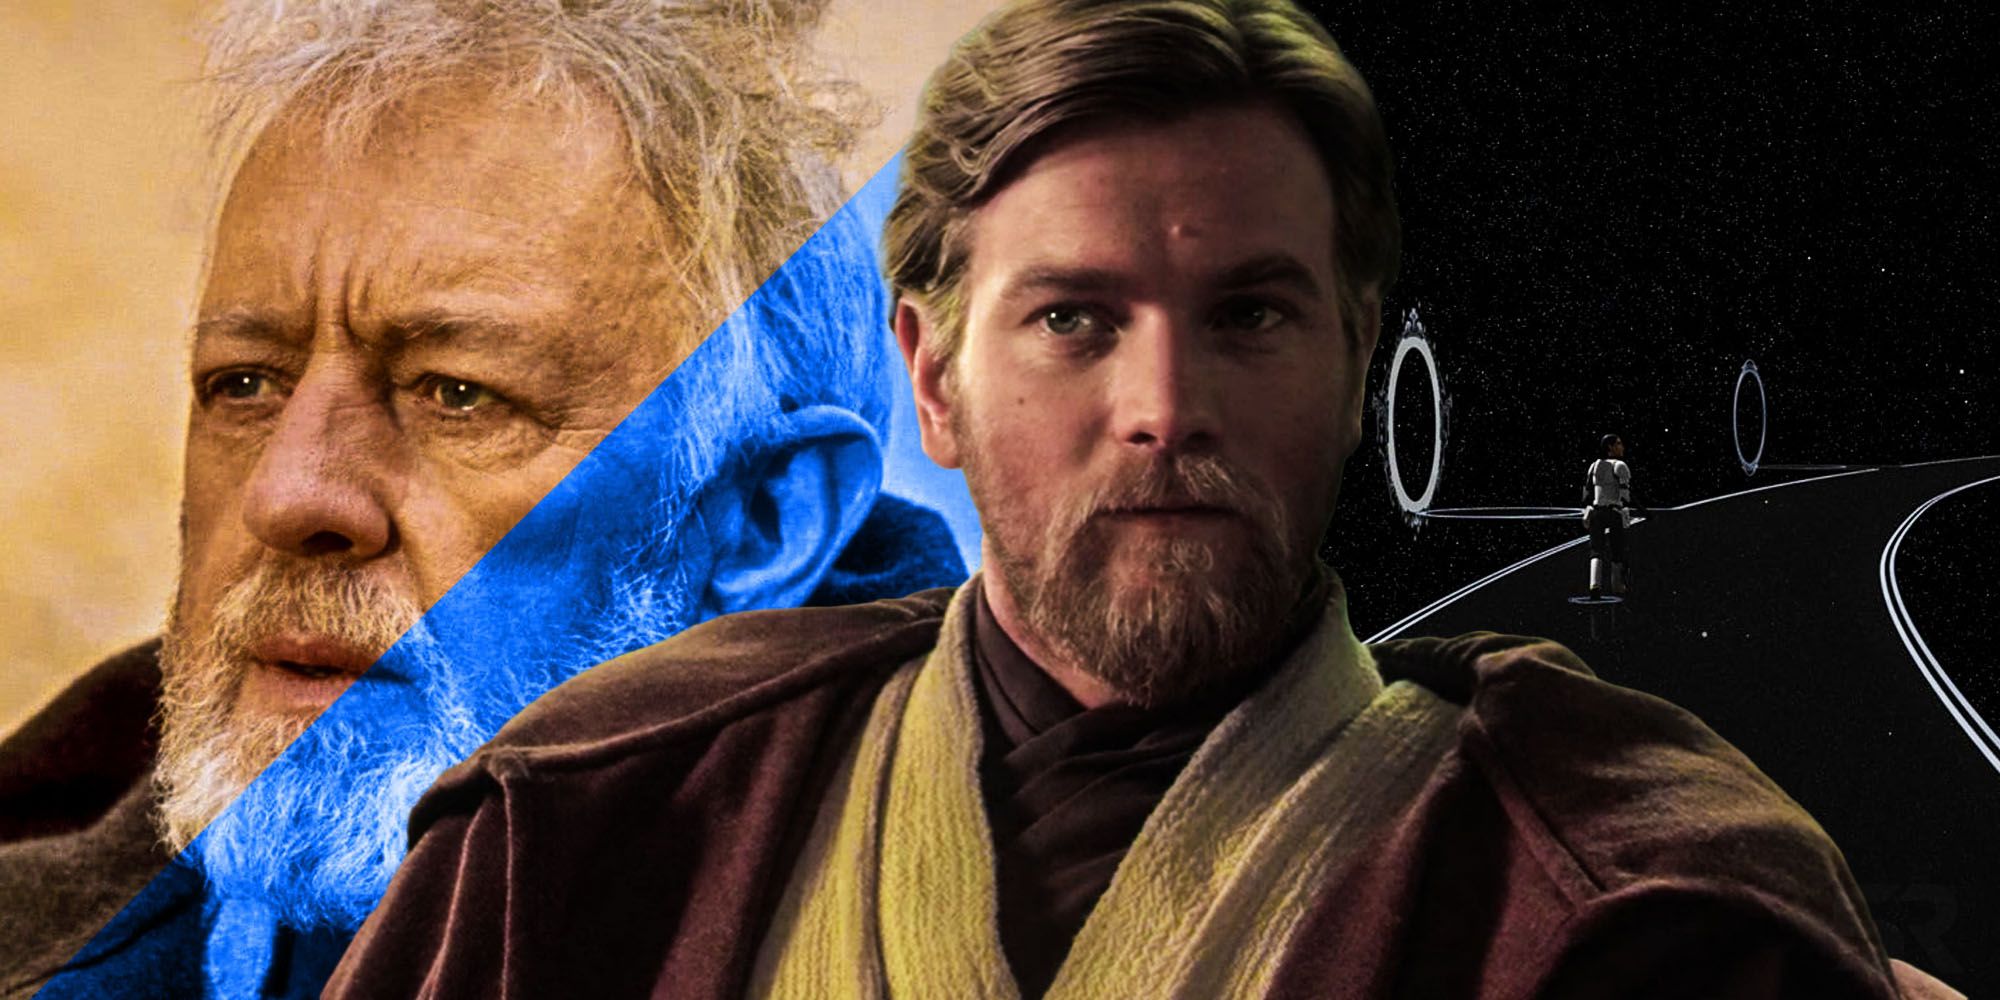 Obi Wan Kenobi in A New Hope and Attack of the Clones